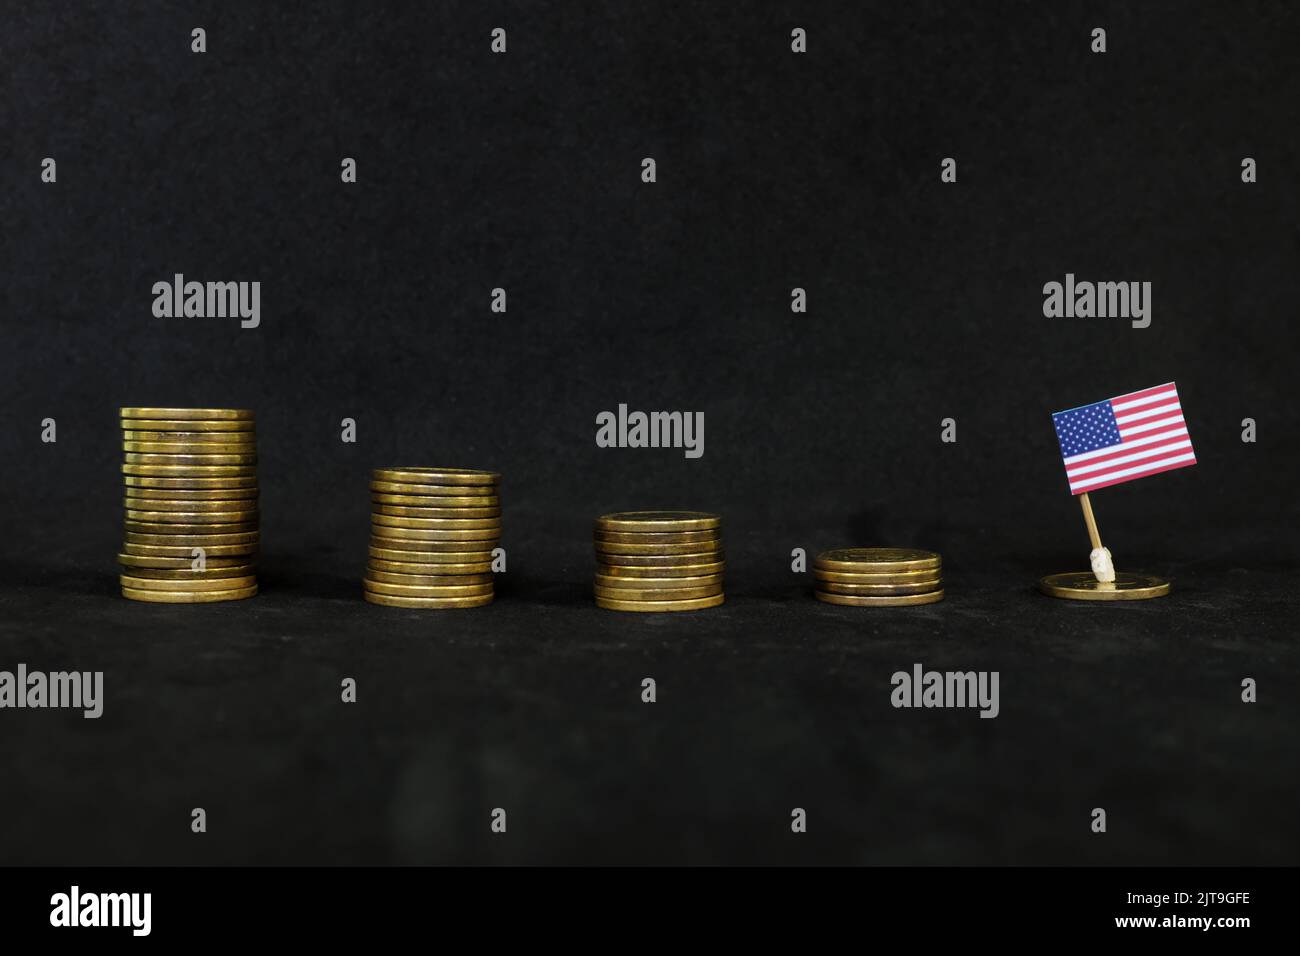 US economic recession, financial crisis and dollar depreciation concept. Flag of America in decreasing stack of coins in dark black background. Stock Photo